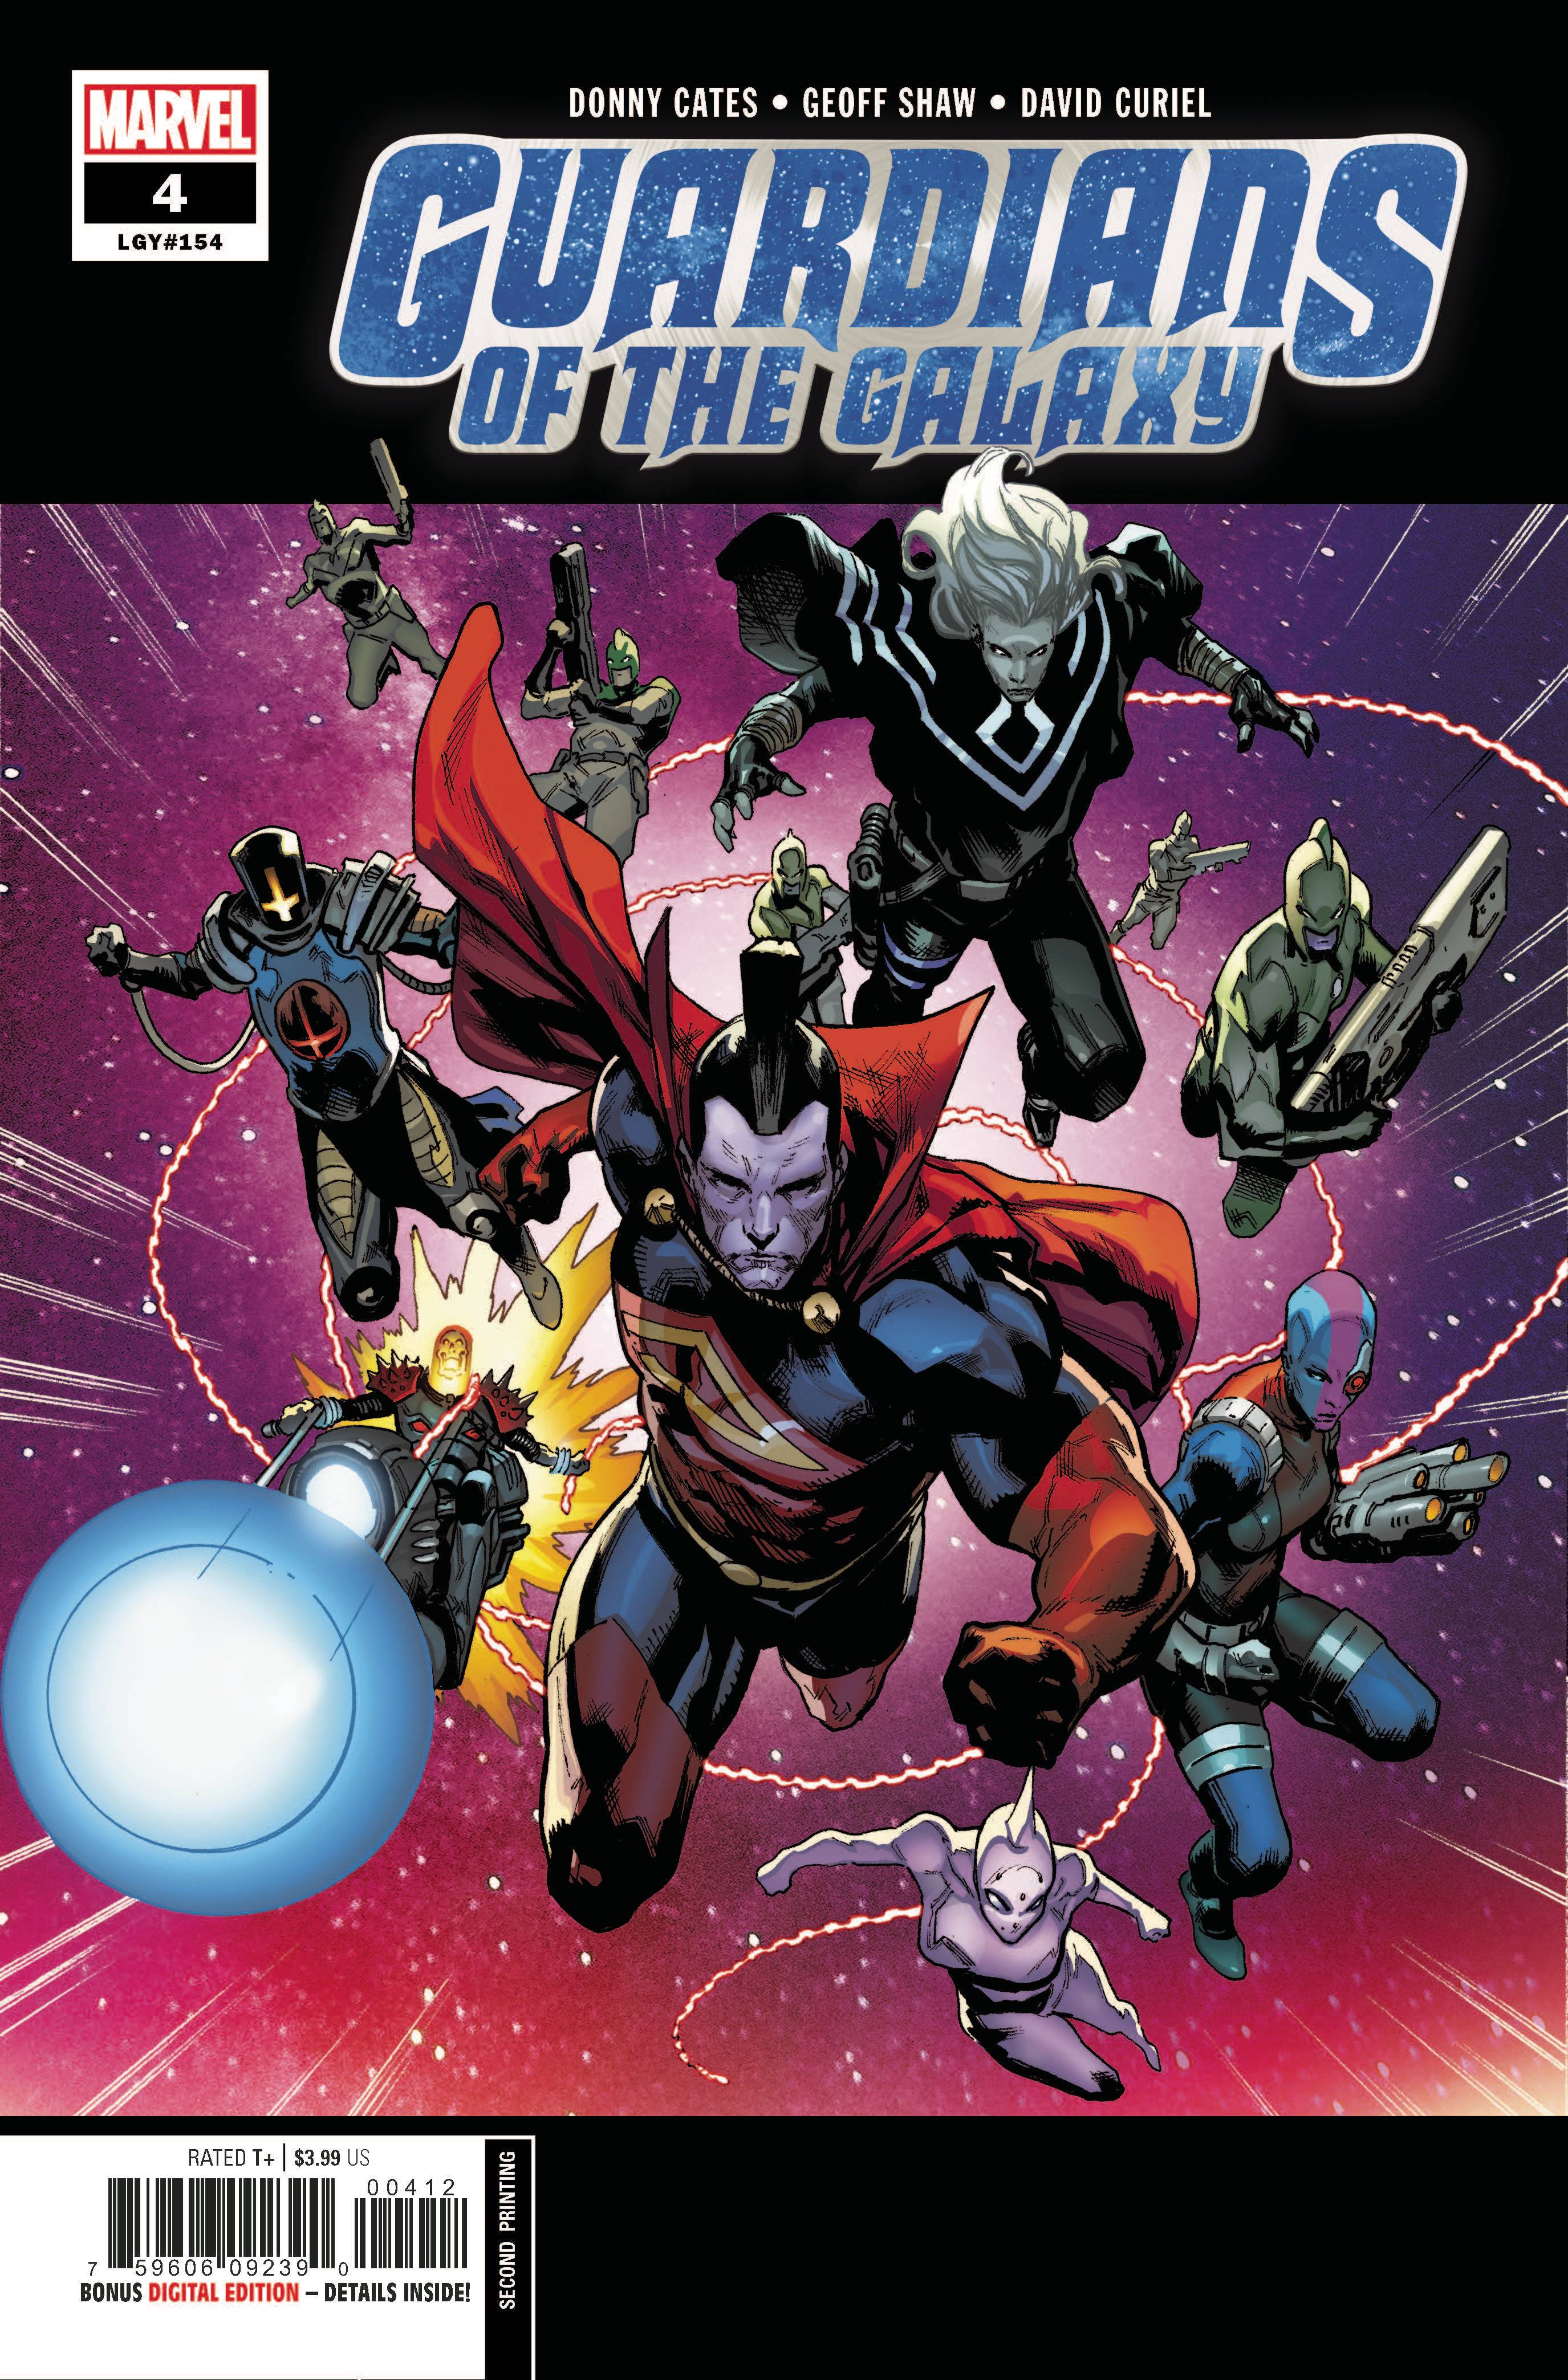 GUARDIANS OF THE GALAXY #4 2ND PTG SHAW VAR 05/29/19 FOC 04/05/19